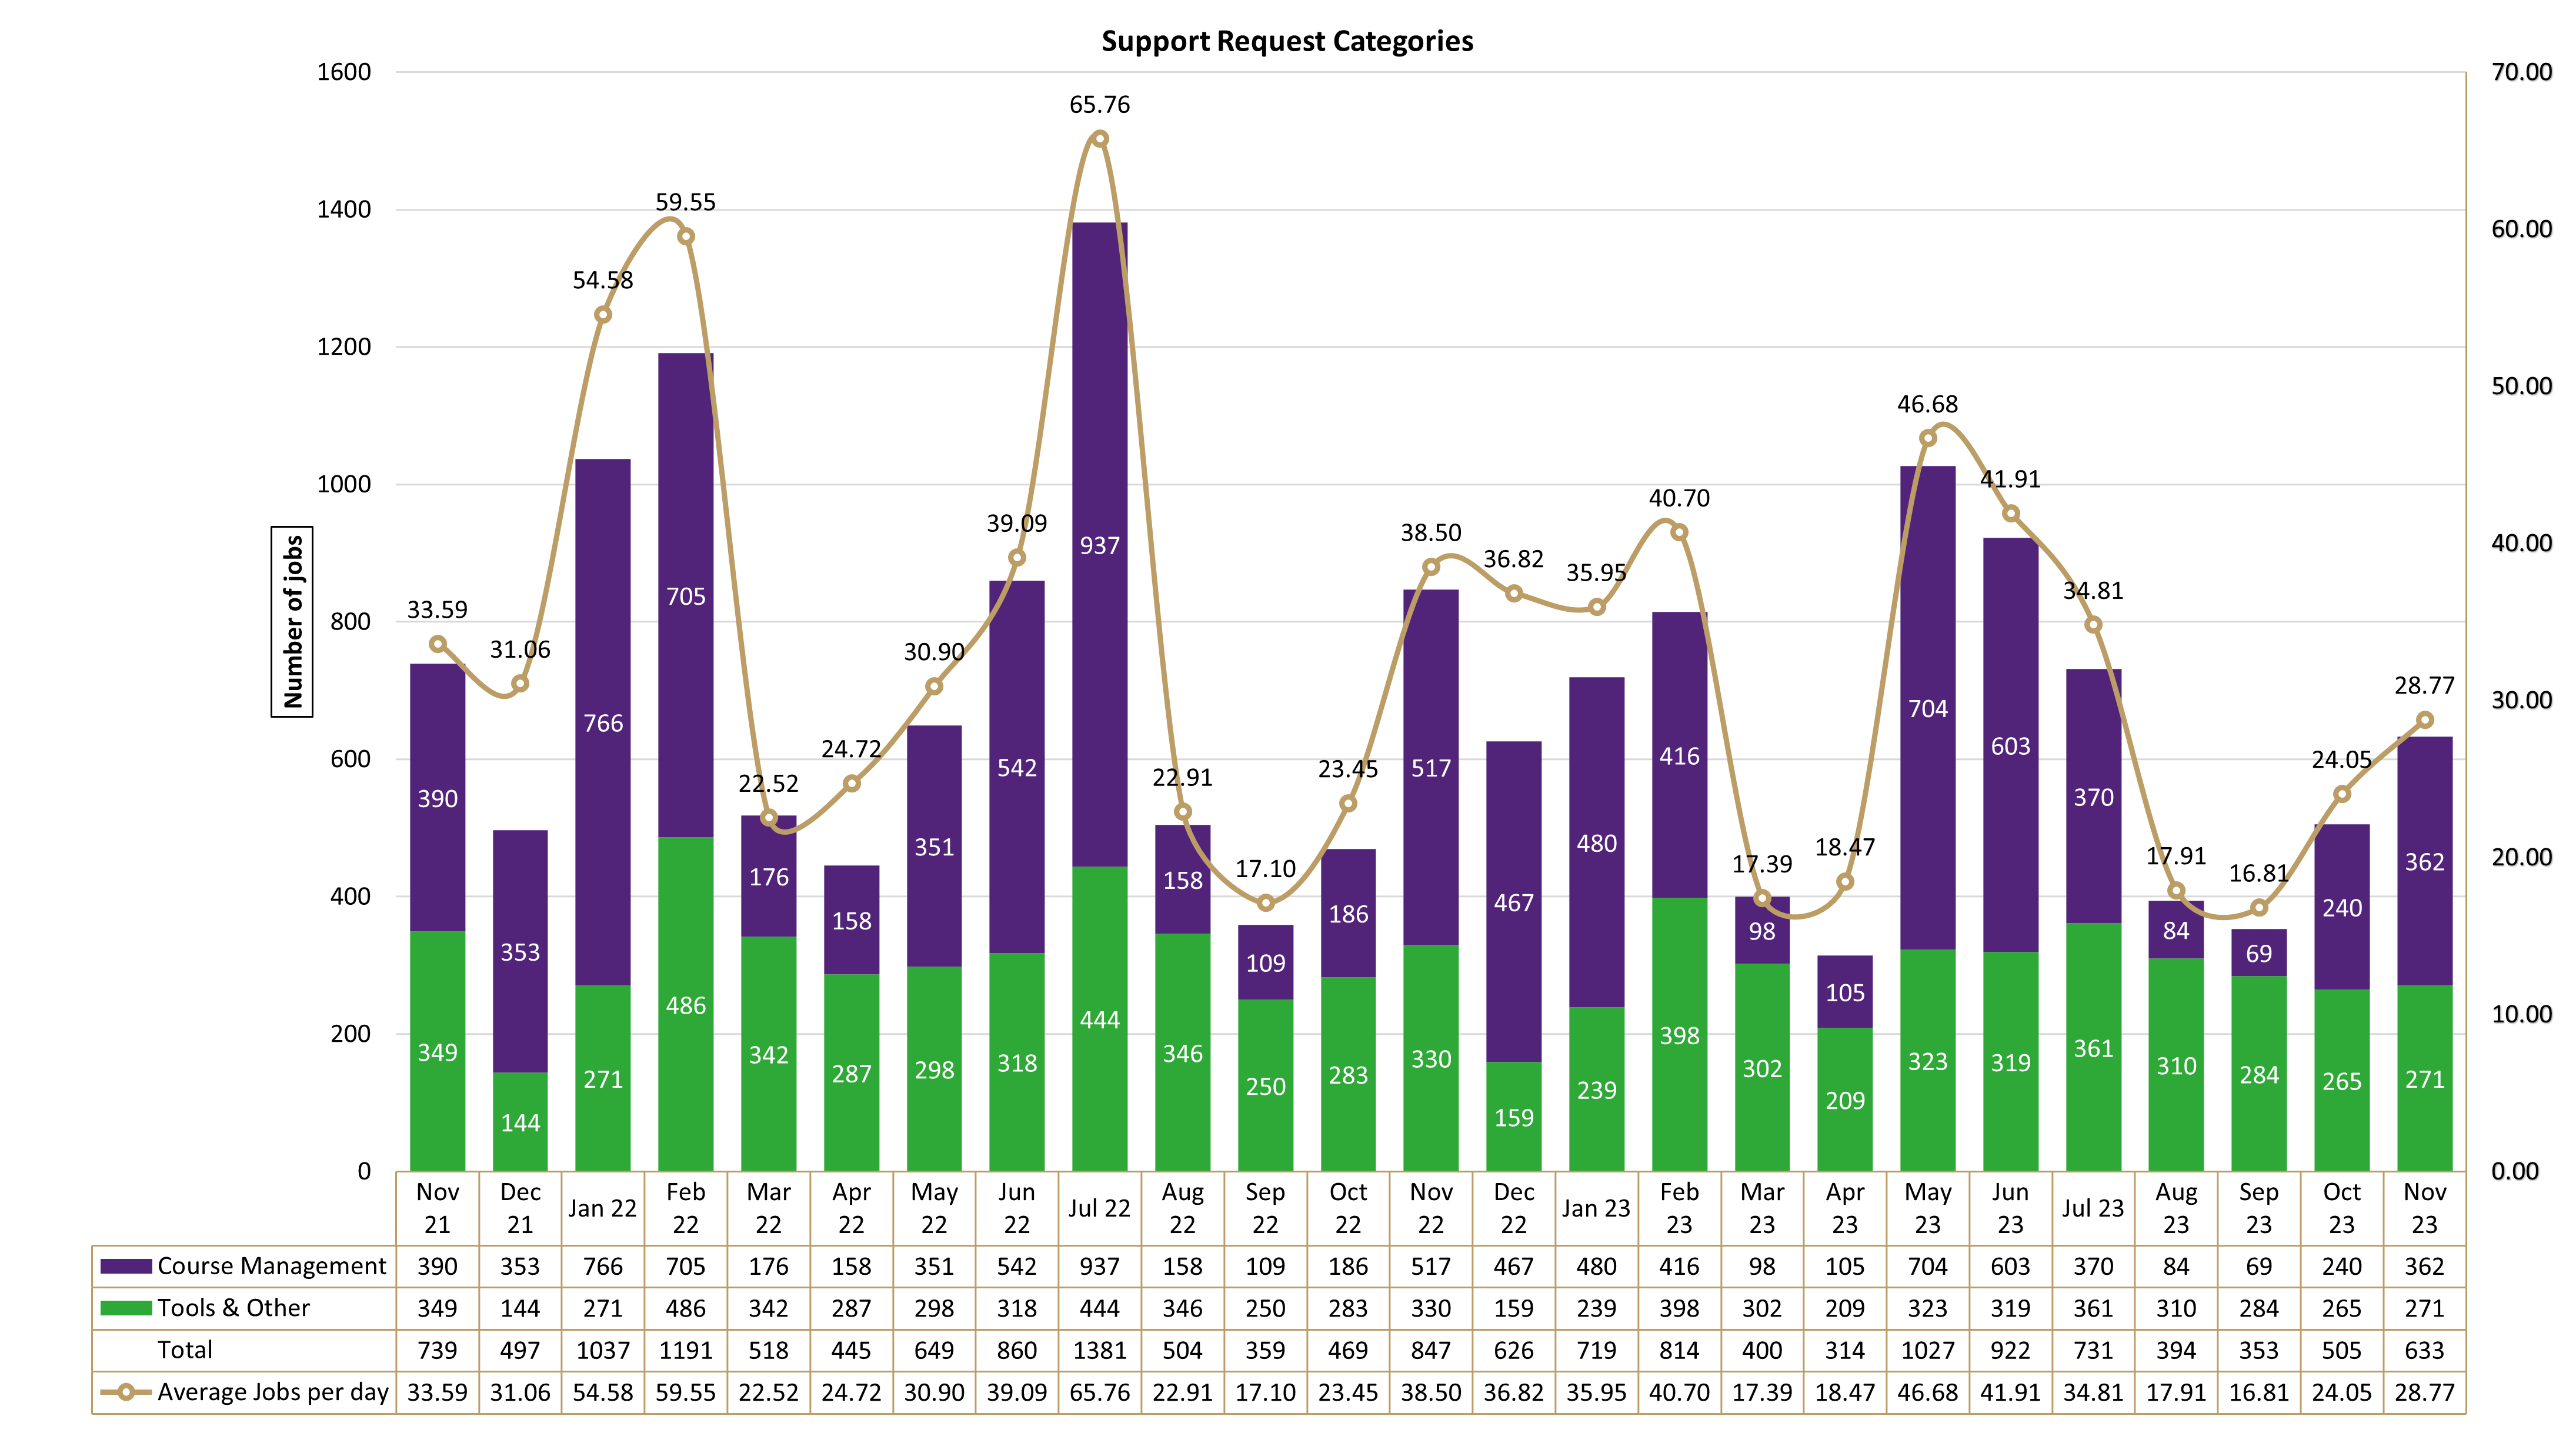 Chart of Support Request Categories from November 2021 to November 2023